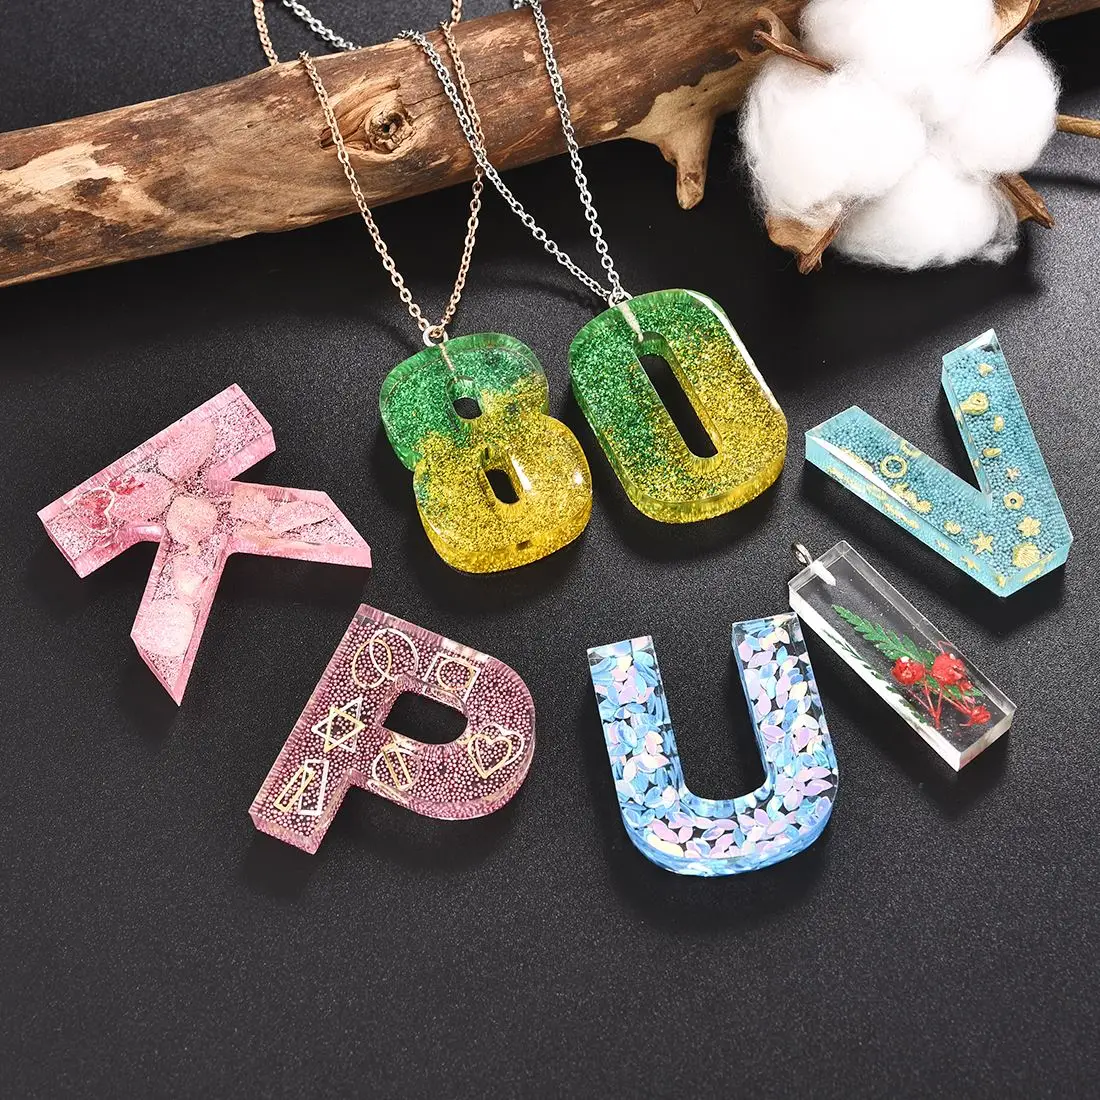 DIY Resin Letter Molds Backward Alphabet Silicone Mold for Making Resin  Keychains Pendant Jewelry